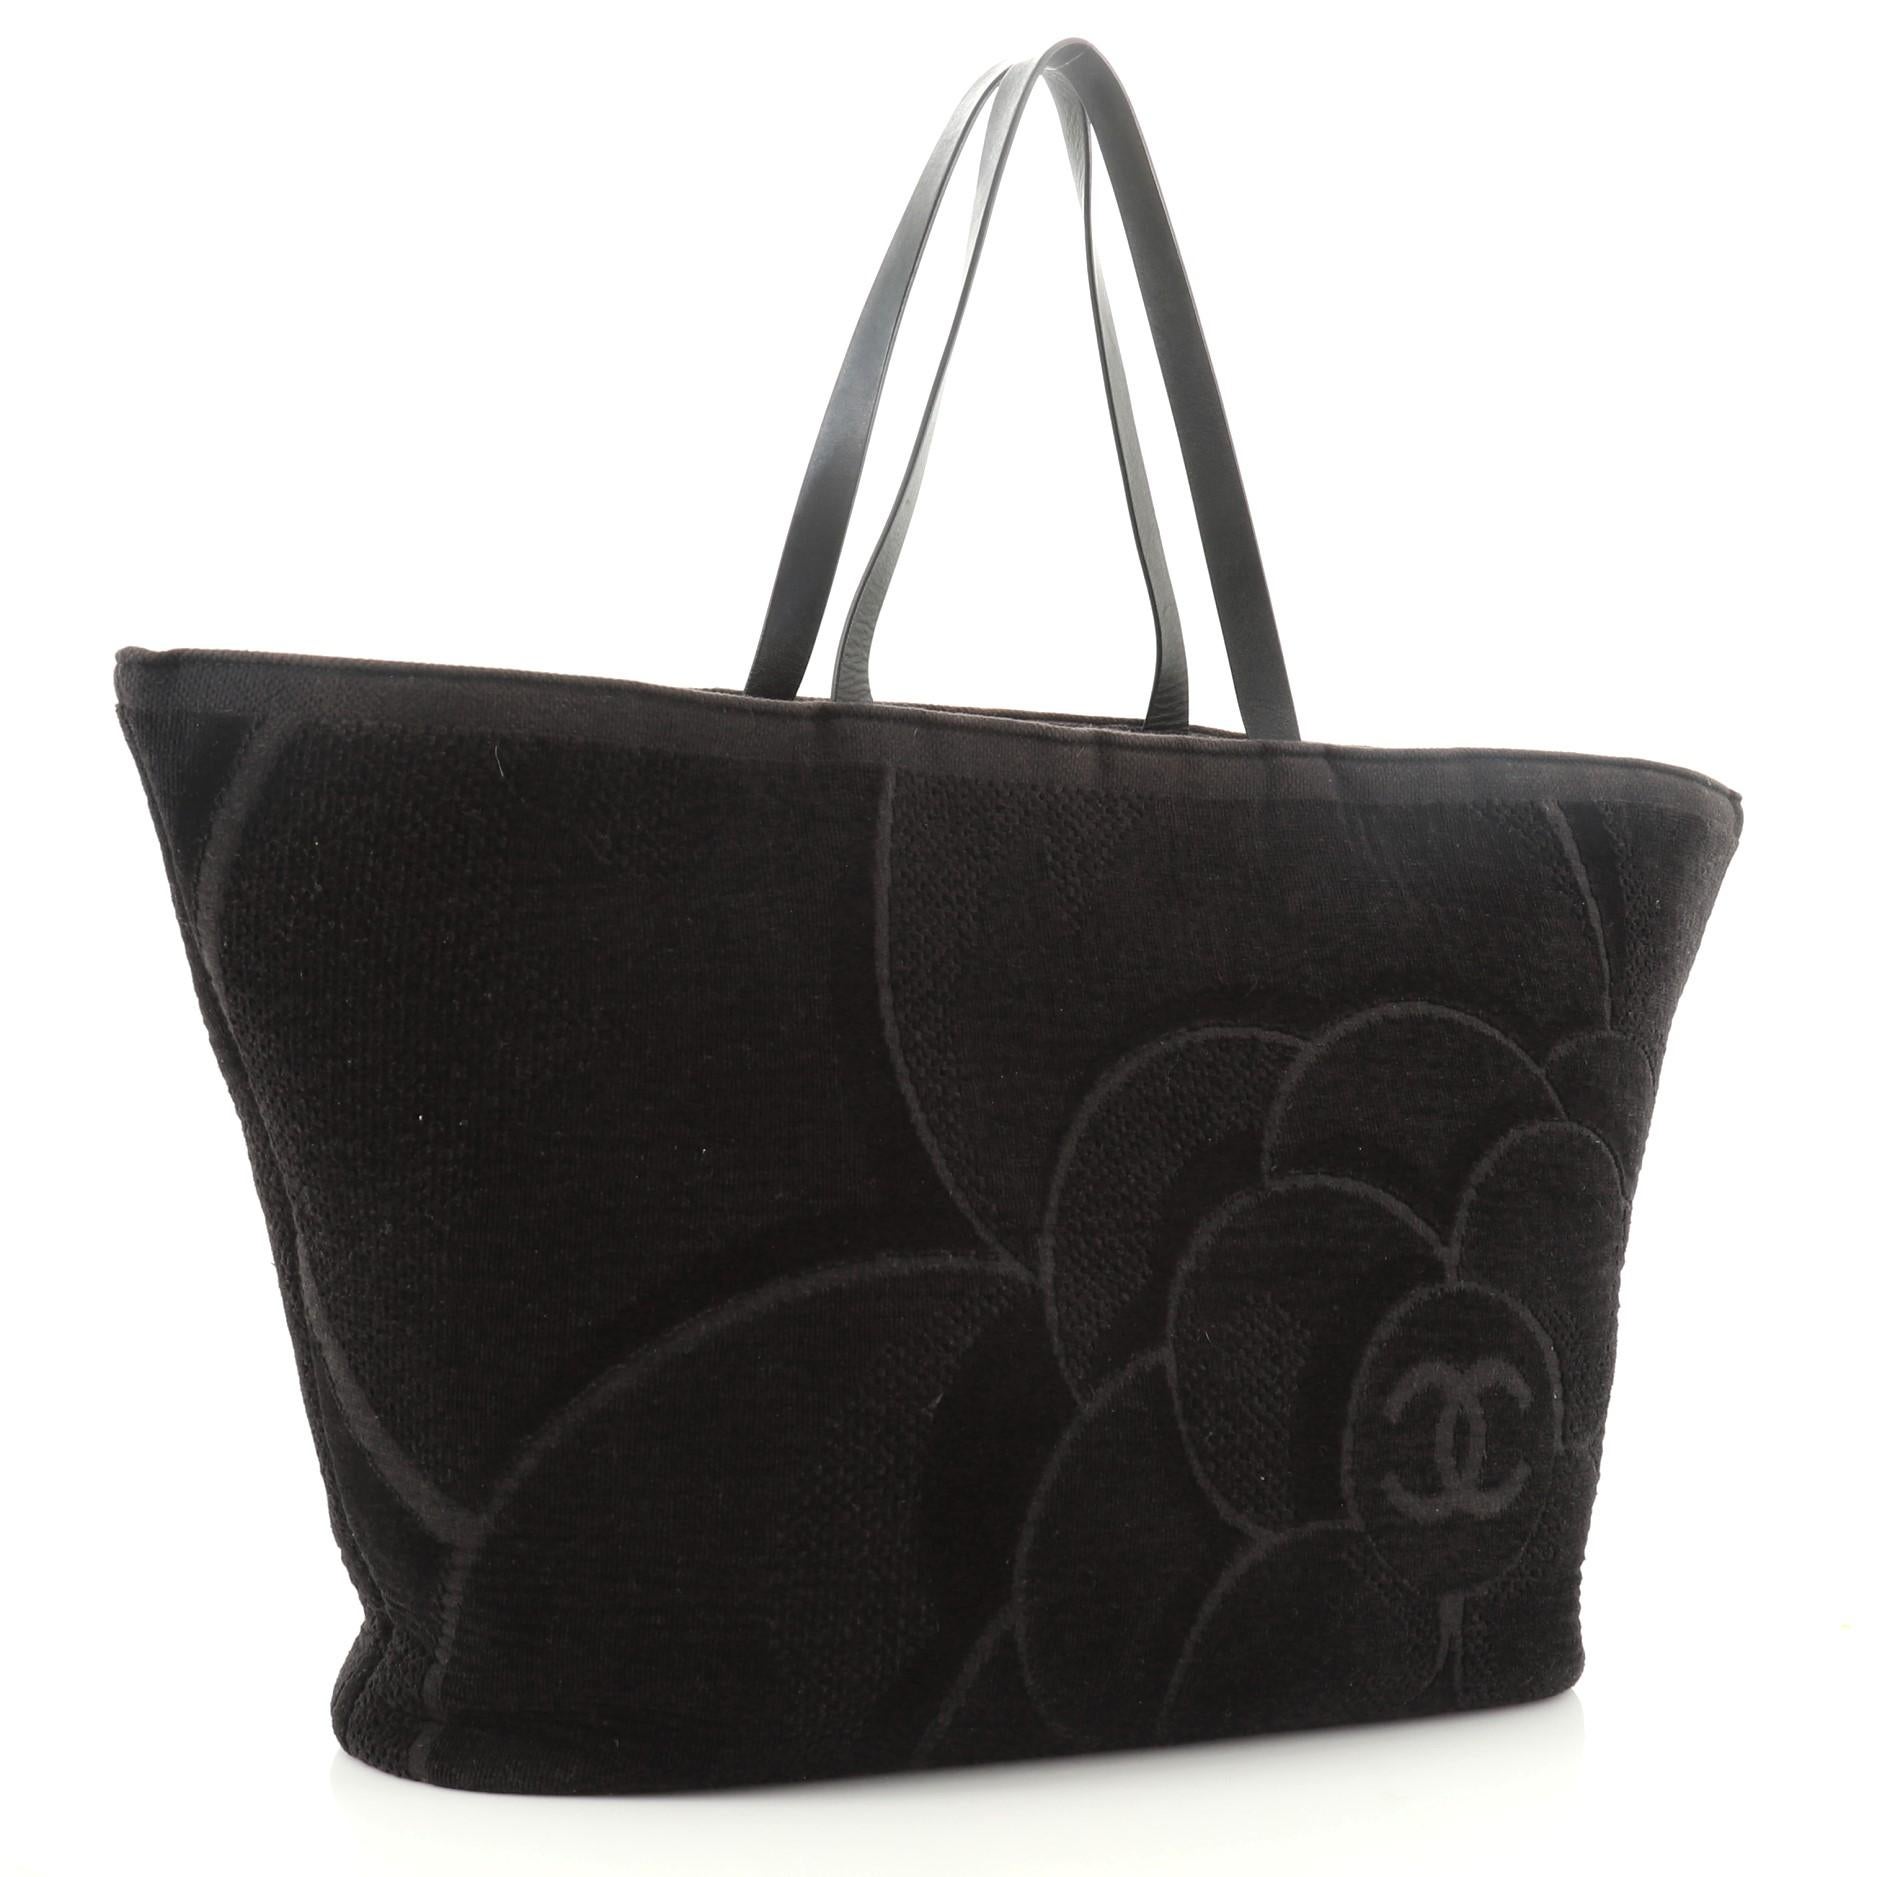 Black Chanel Beach Tote Camellia Terry Cloth Large